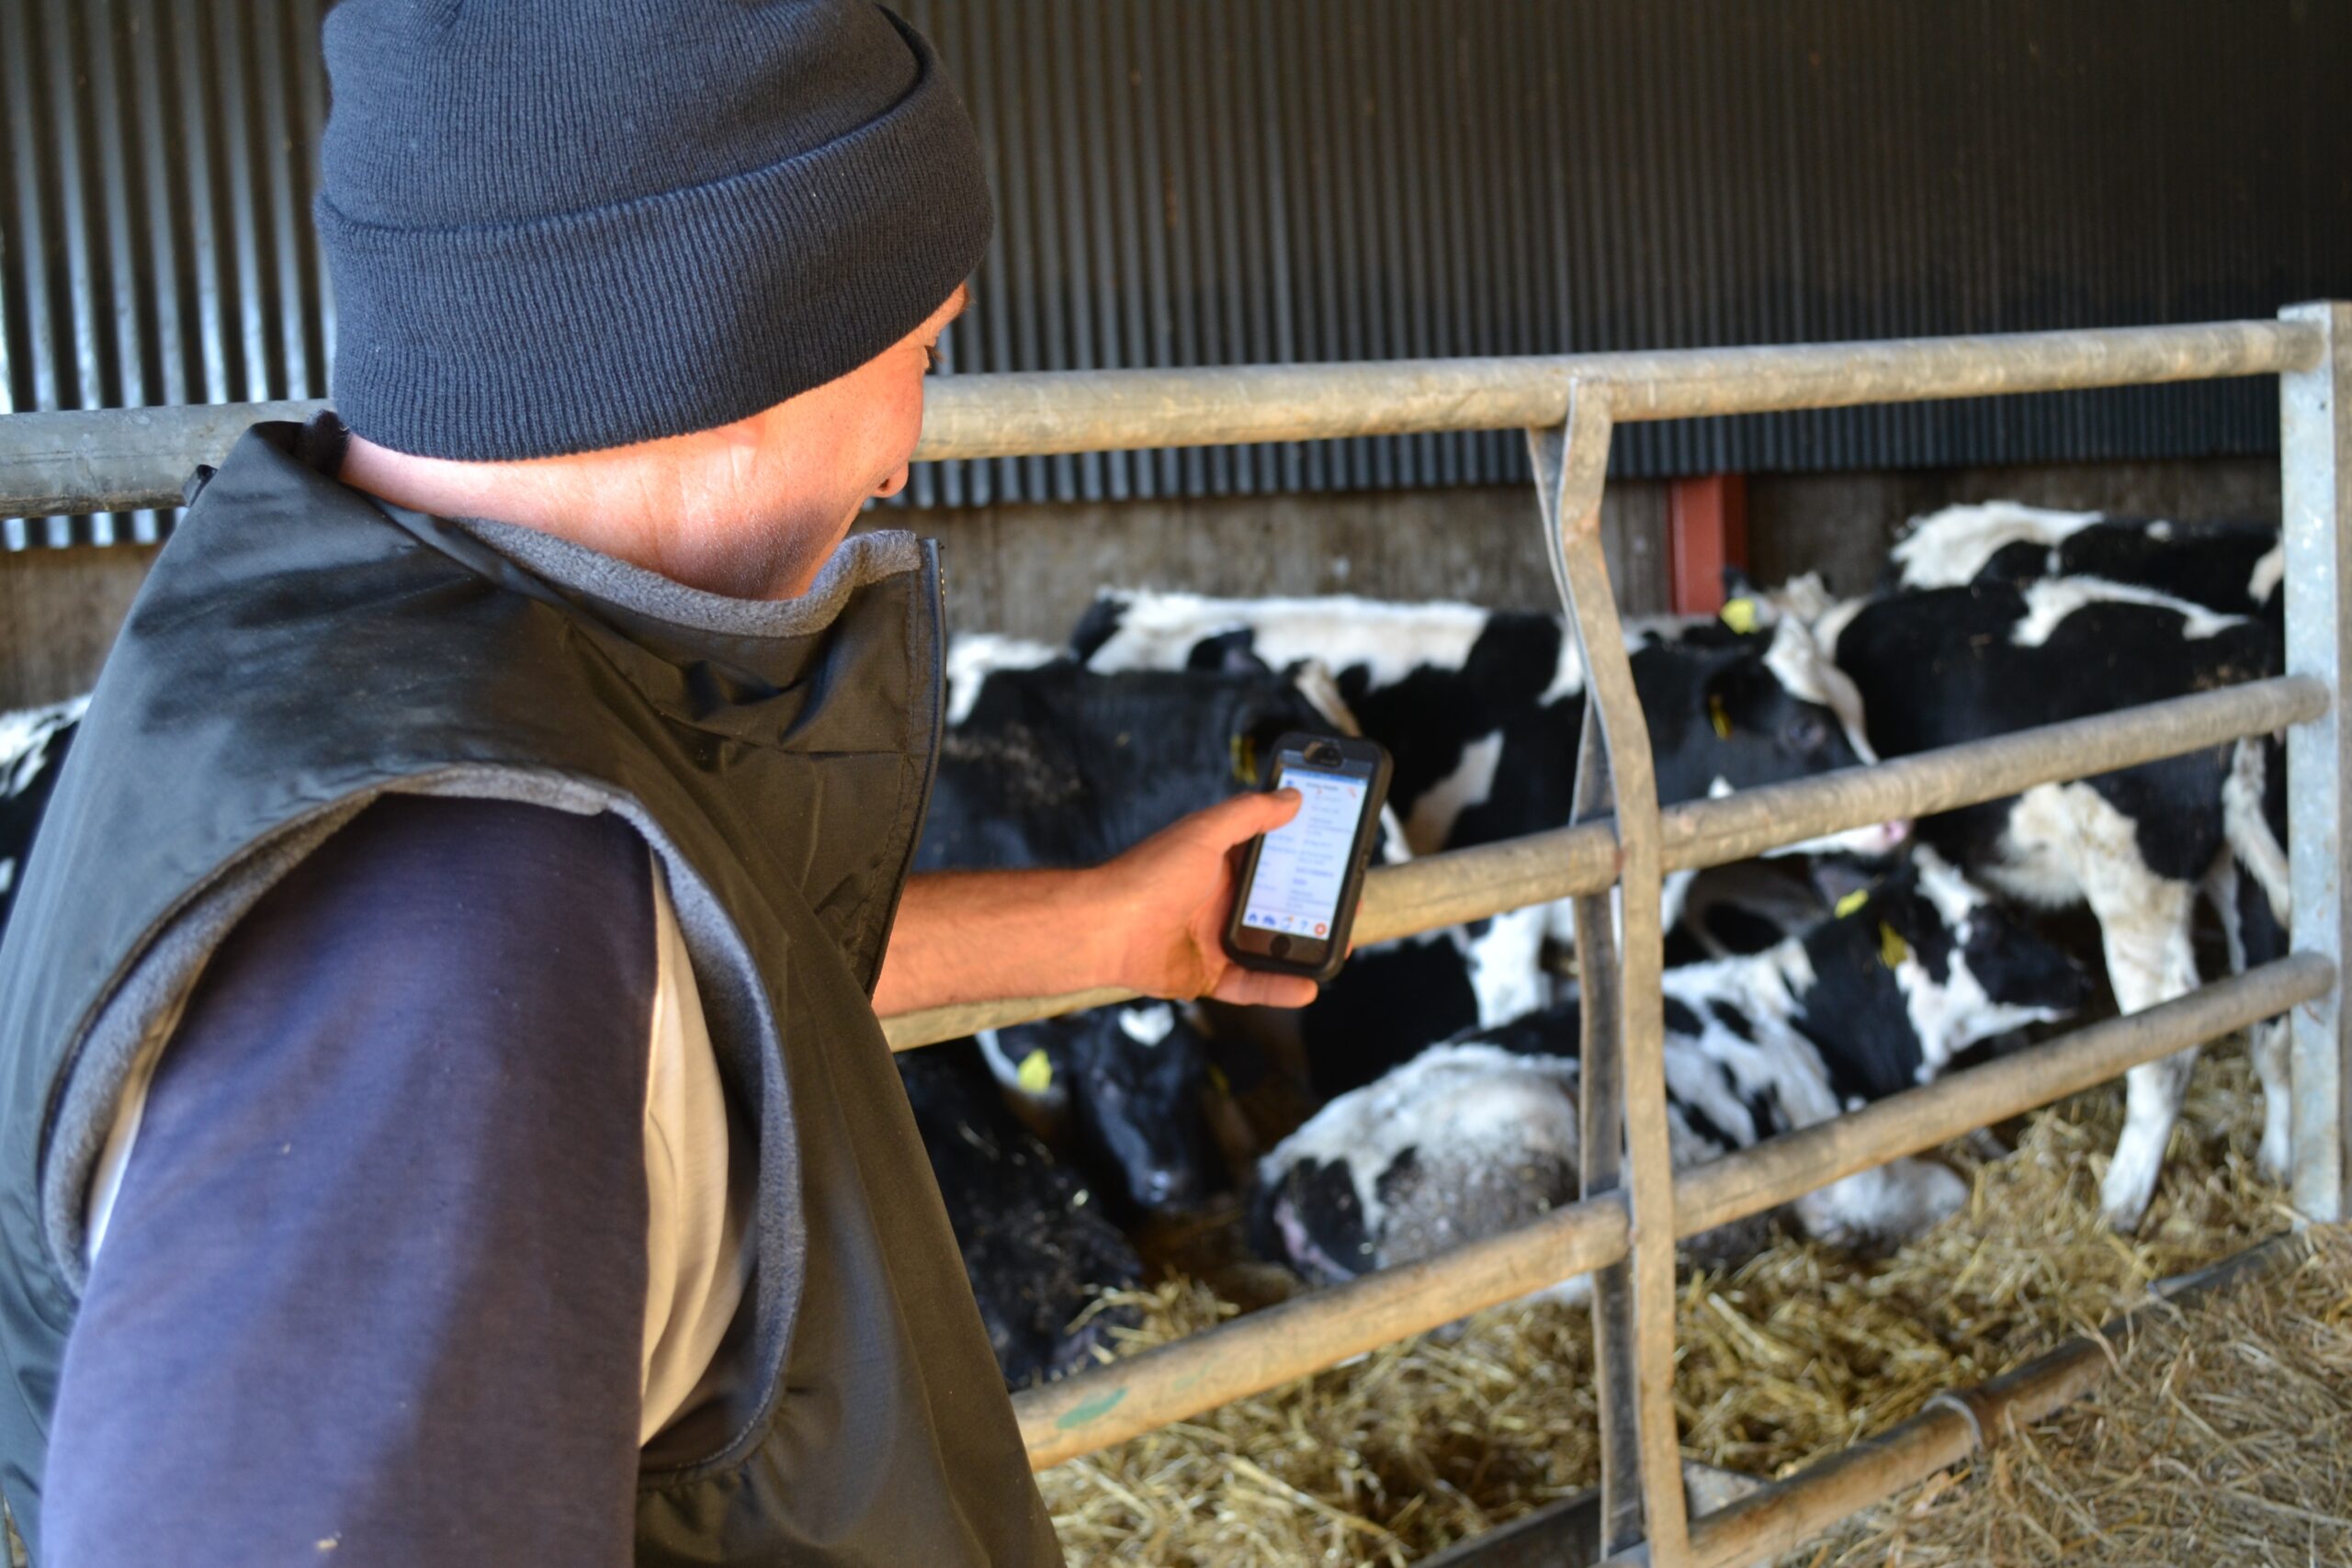 Farmer using Herdwatch in shed with cattle